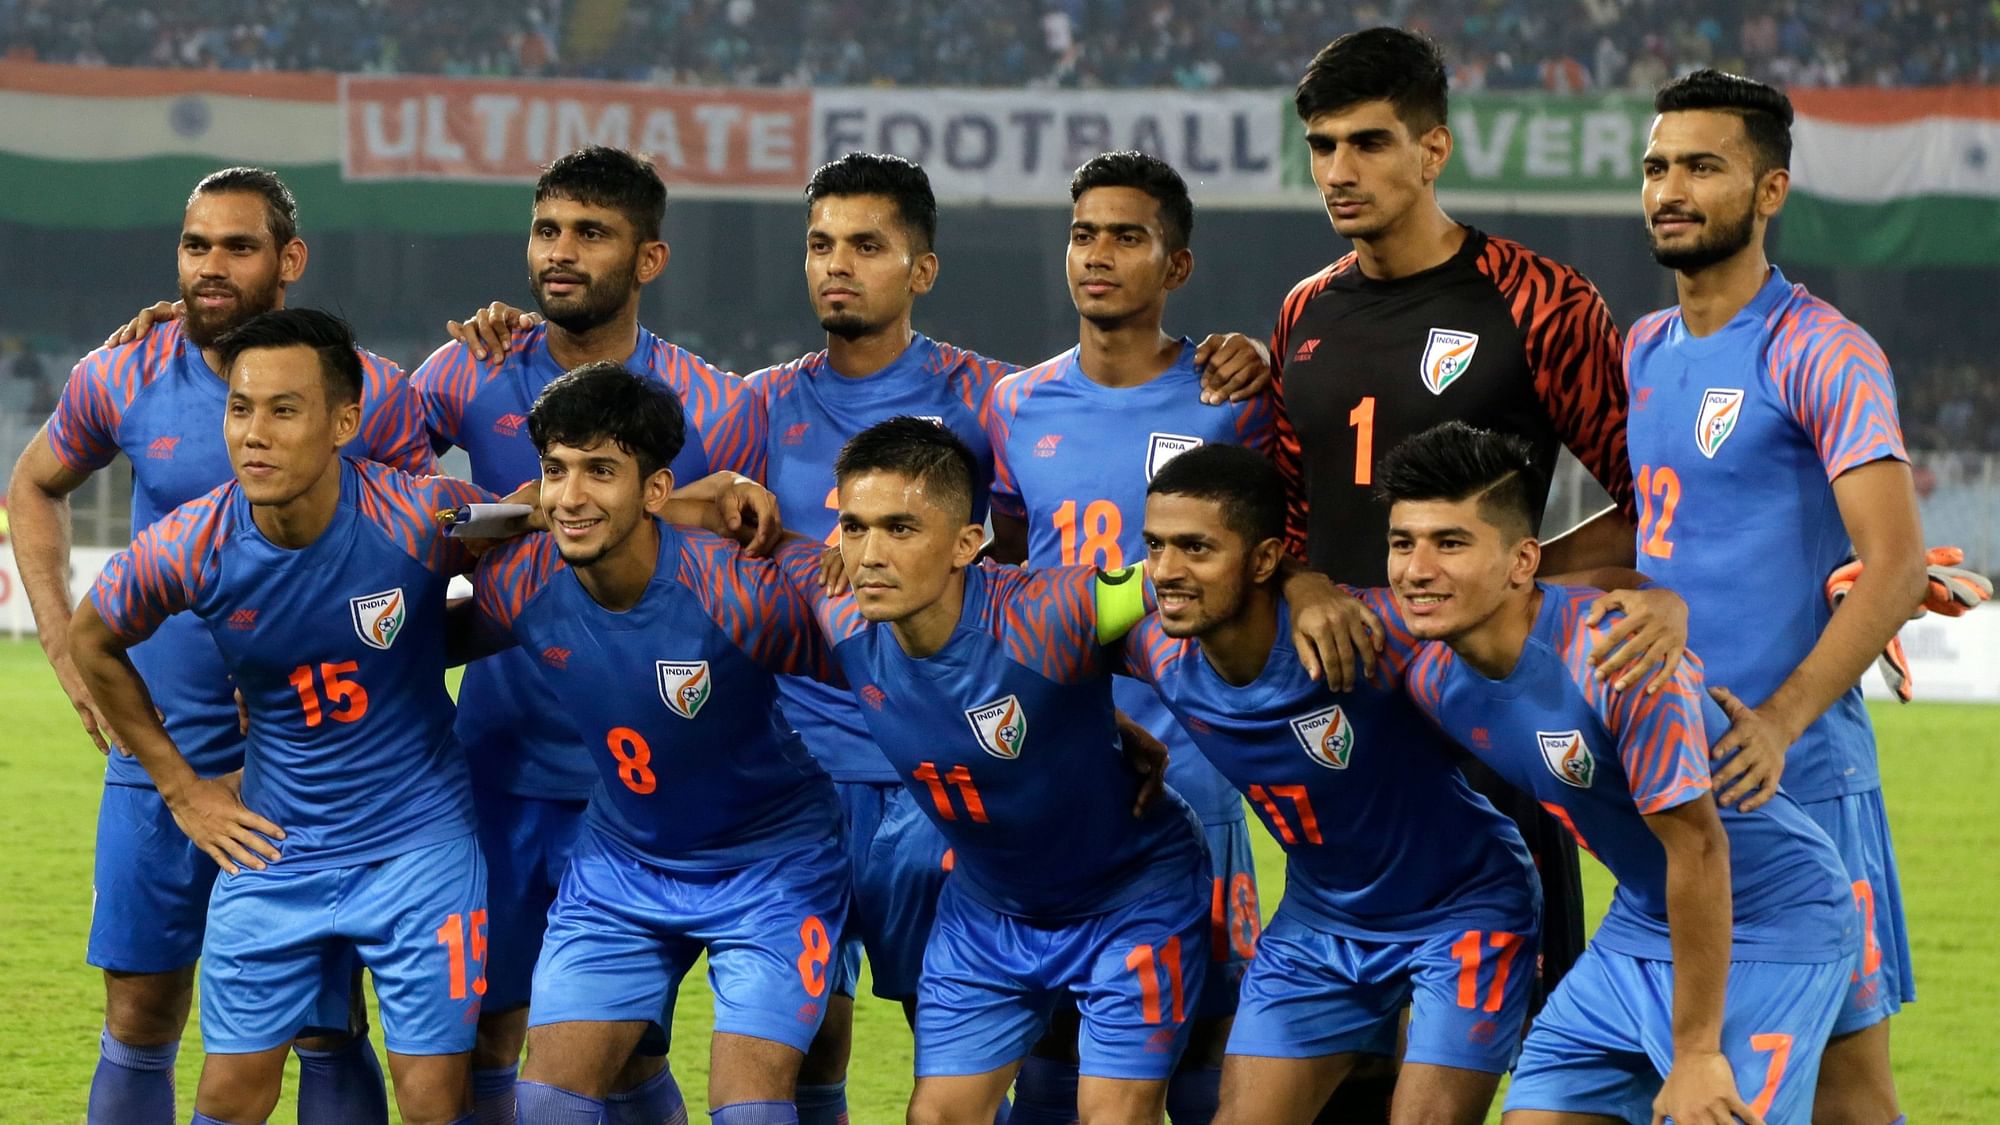 The Indian National football team peaked in the rankings this year at 101 from April to July.